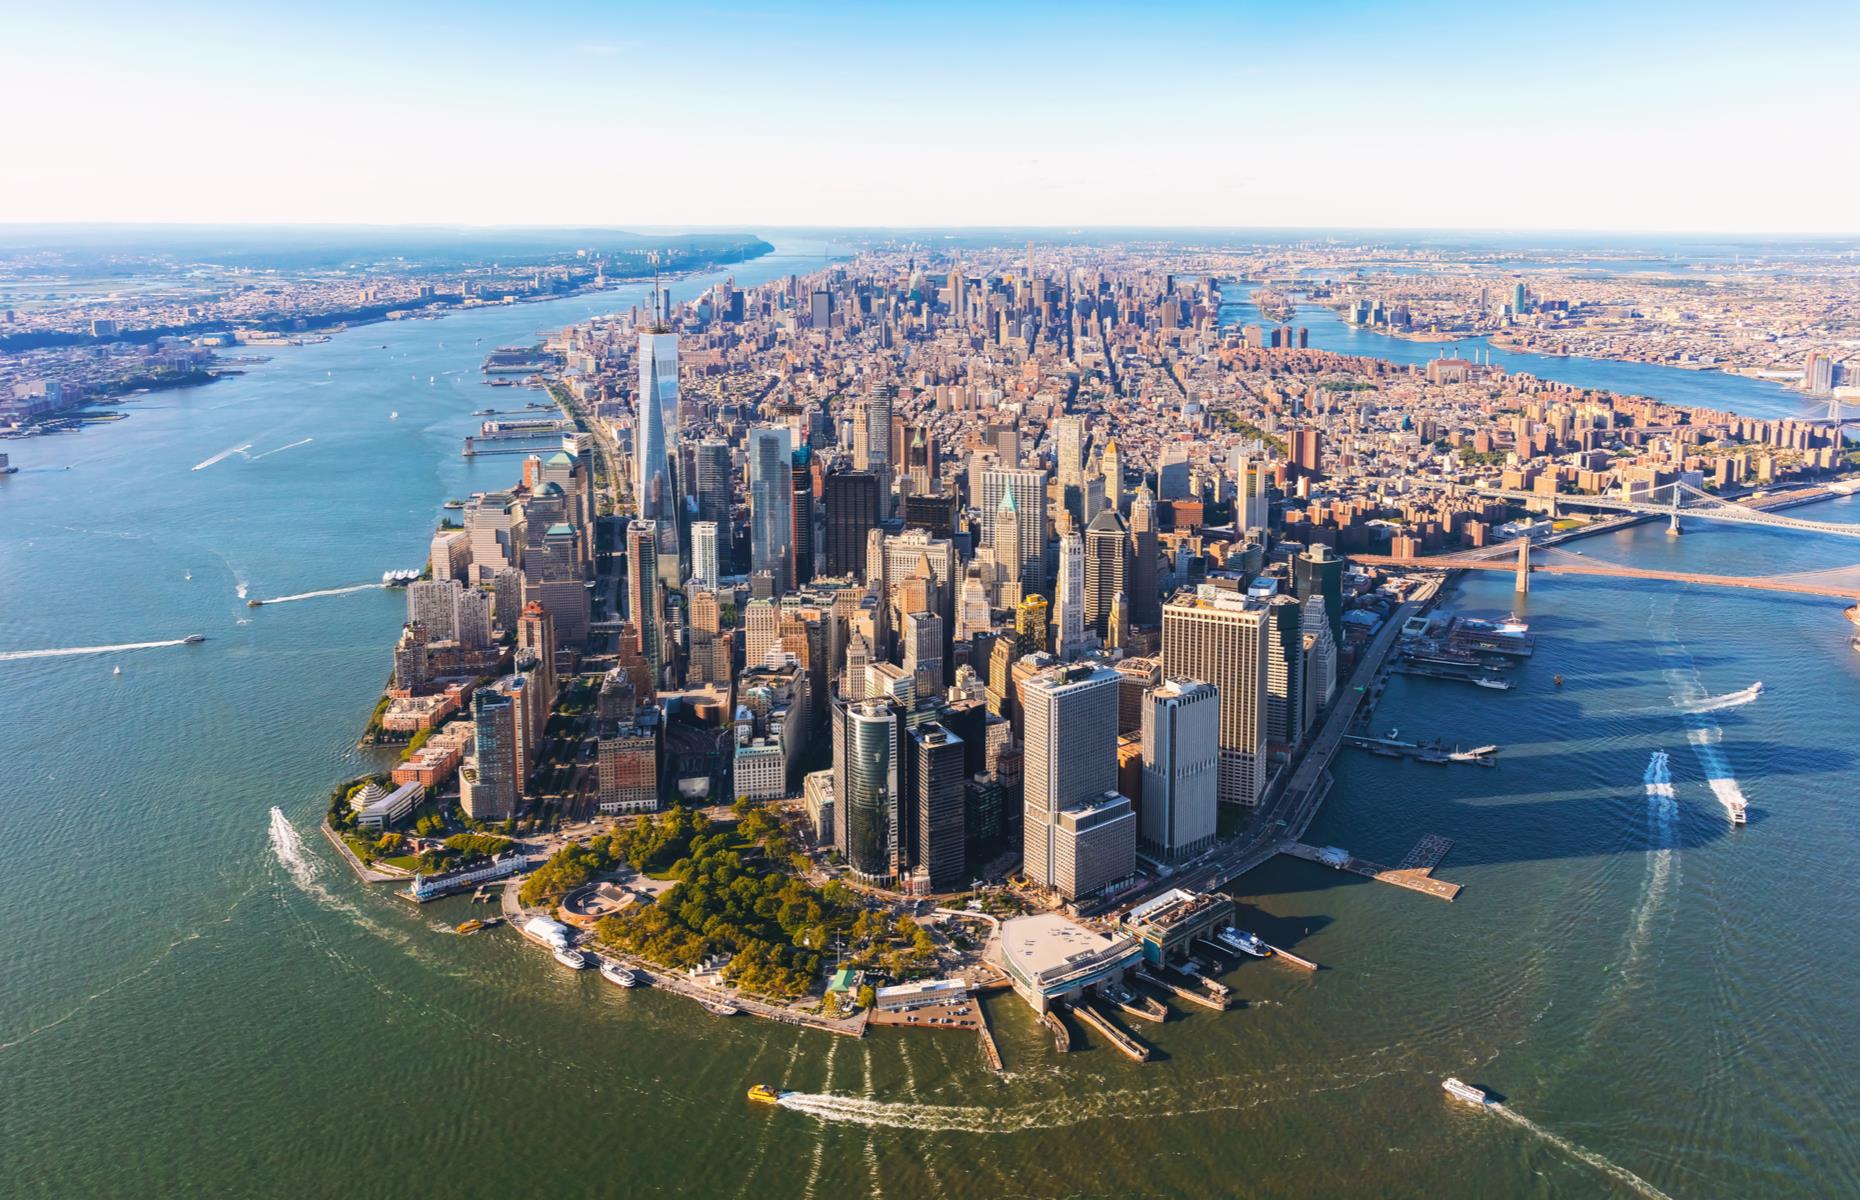 <p>A bird's-eye look at the Port of New York and New Jersey also gives spectacular sweeping views across the Big Apple. It covers a region within a 25-mile radius of the Statue of Liberty and is usually an extremely popular cruise destination, plus a gateway for travel to the Caribbean, Canada, Europe and beyond.</p>